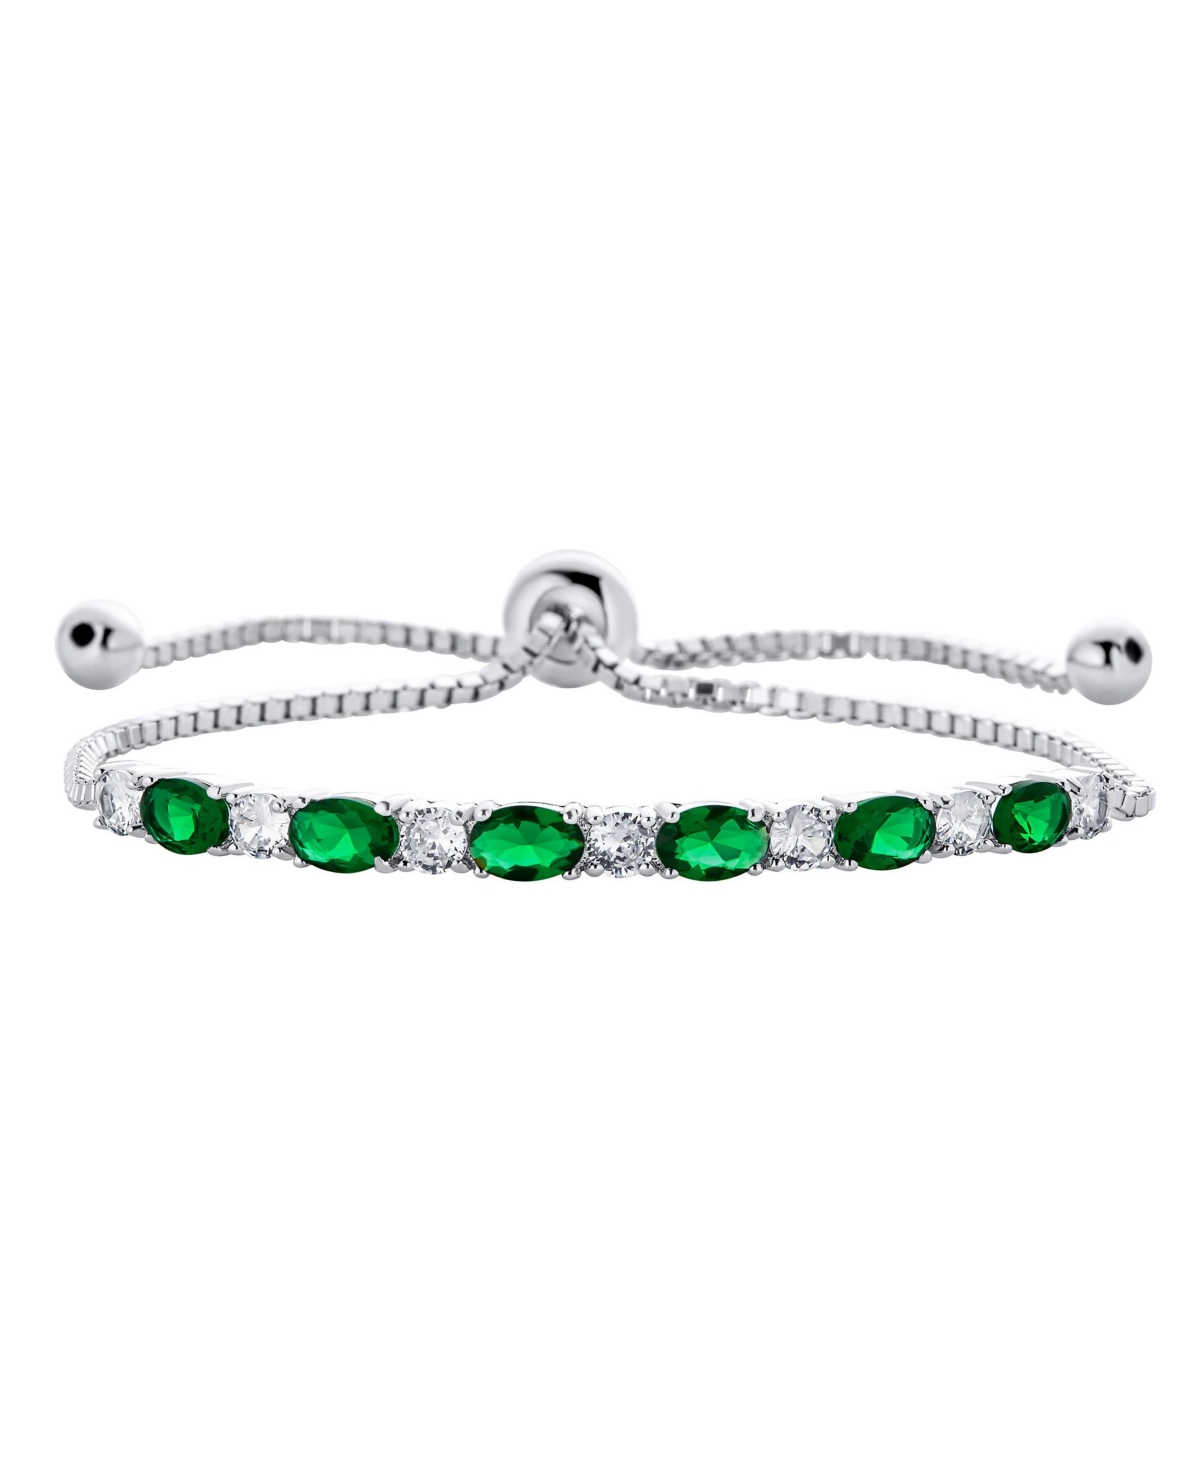 6CTW Cubic Zirconia Oval Emerald Green Alternating Round Clear Aaa Cz Slide Tennis Bracelet Bolo Style For Women Teens Prom Adjustable R